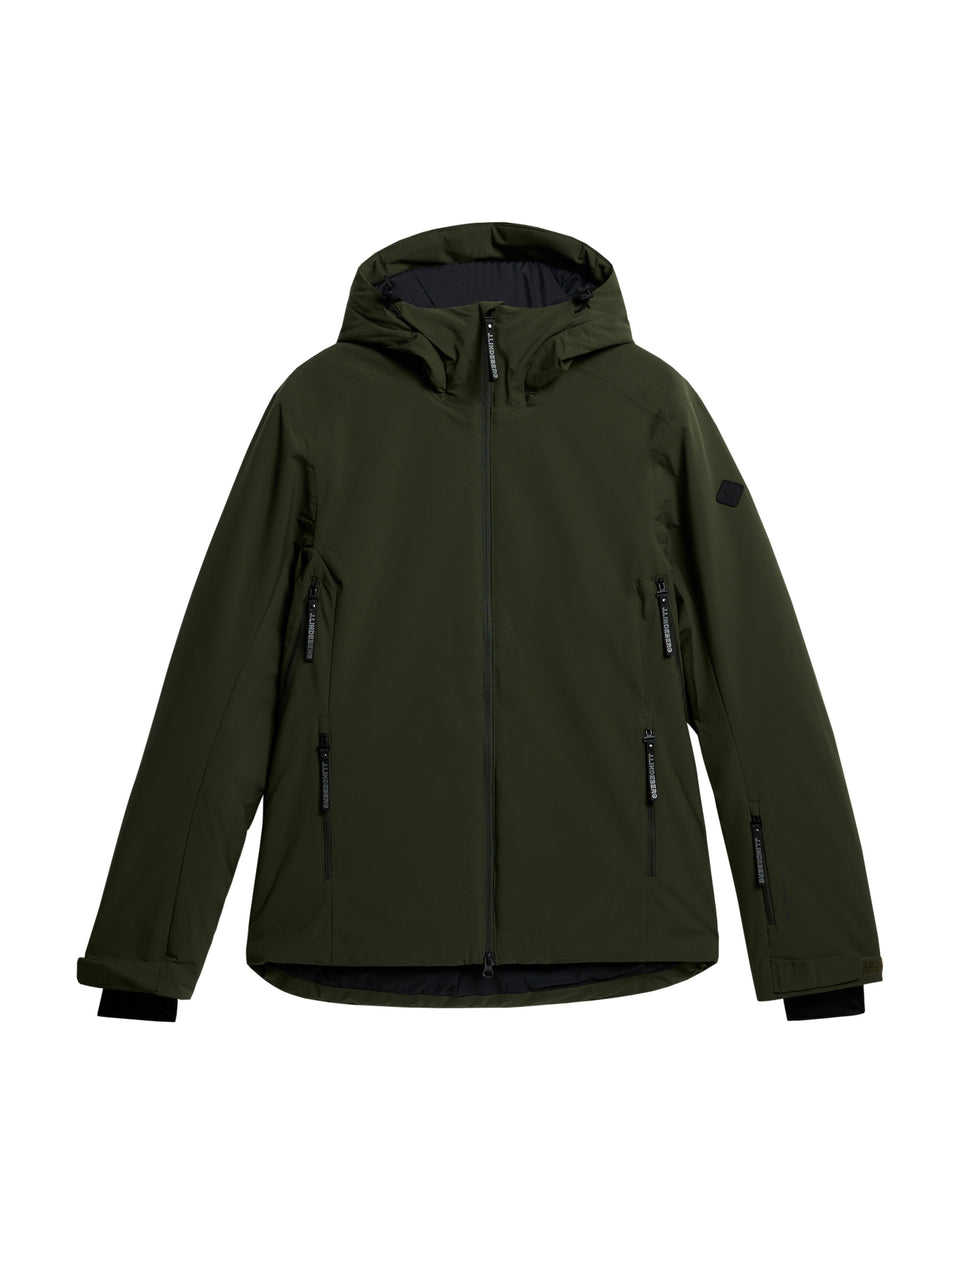 Ace Jacket / Forest Green